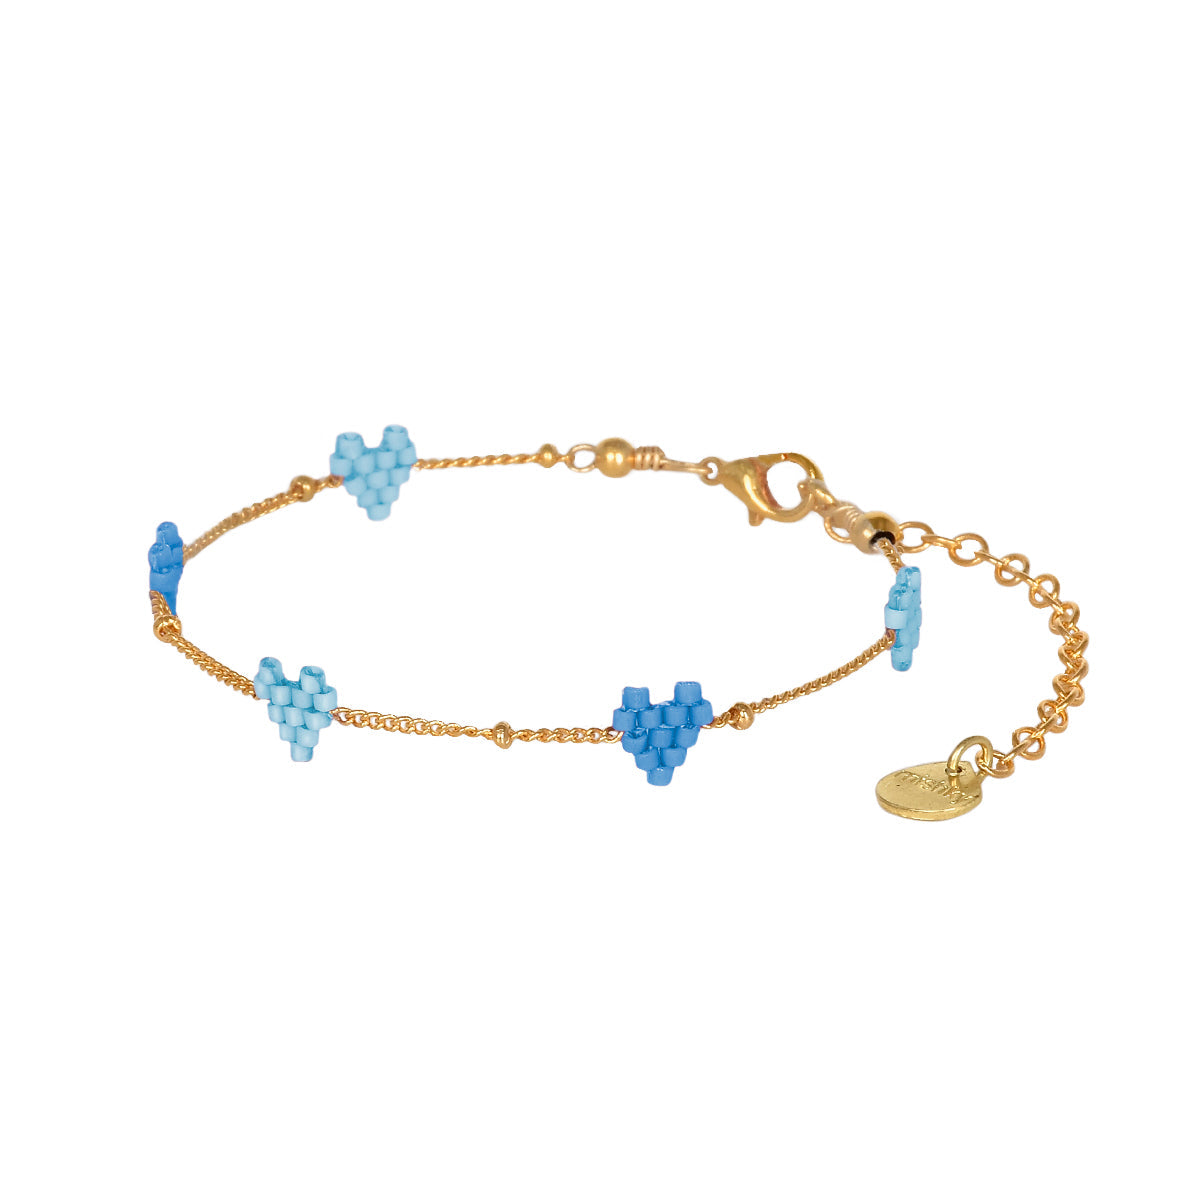 Heartsy Chain gold plated adjustable bracelet 12172